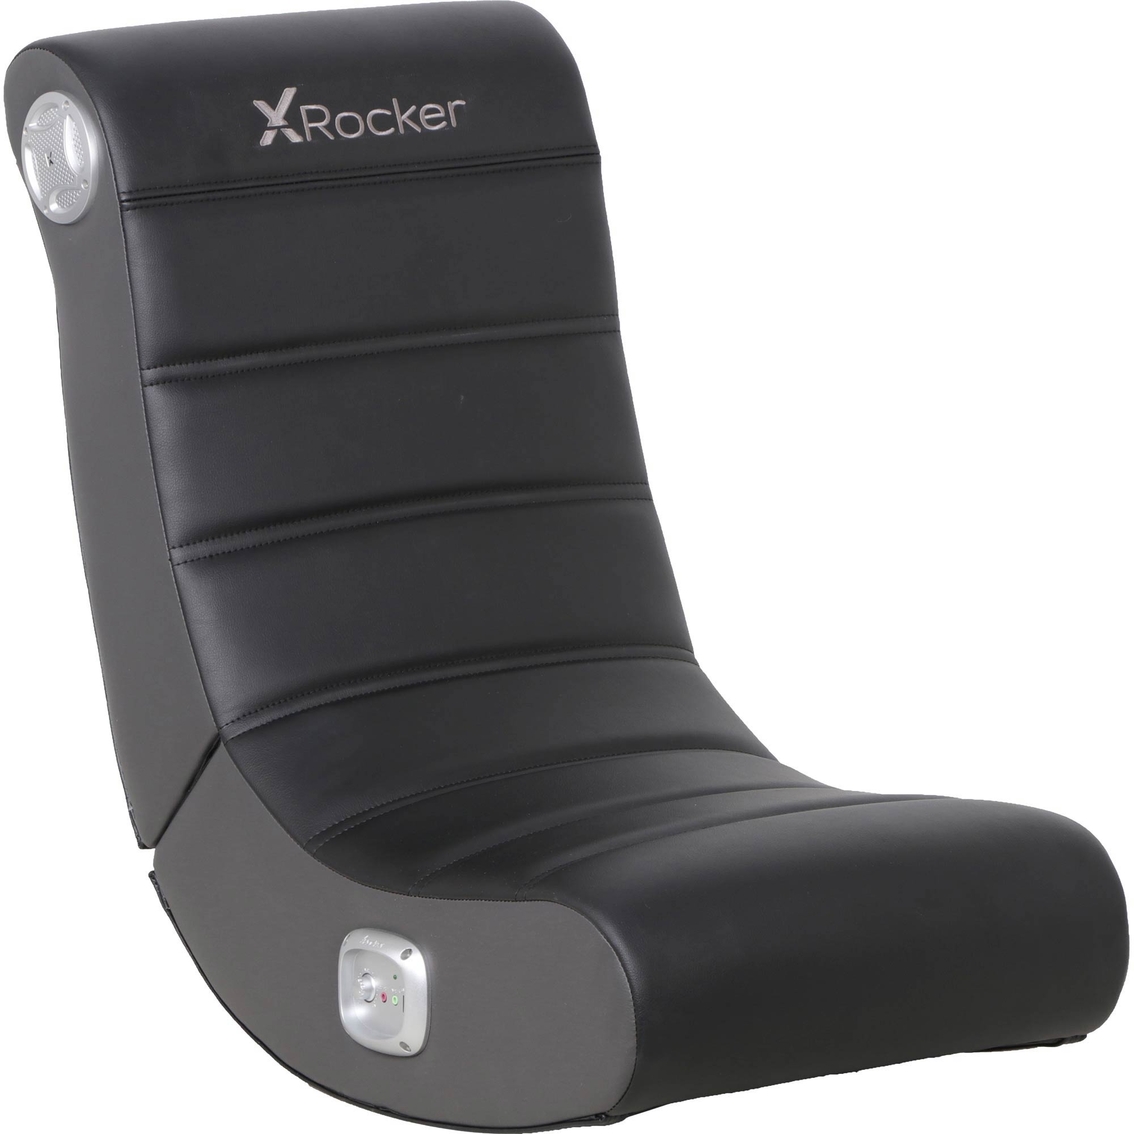 National Brand Floor Rocker Gaming Chair With Audio